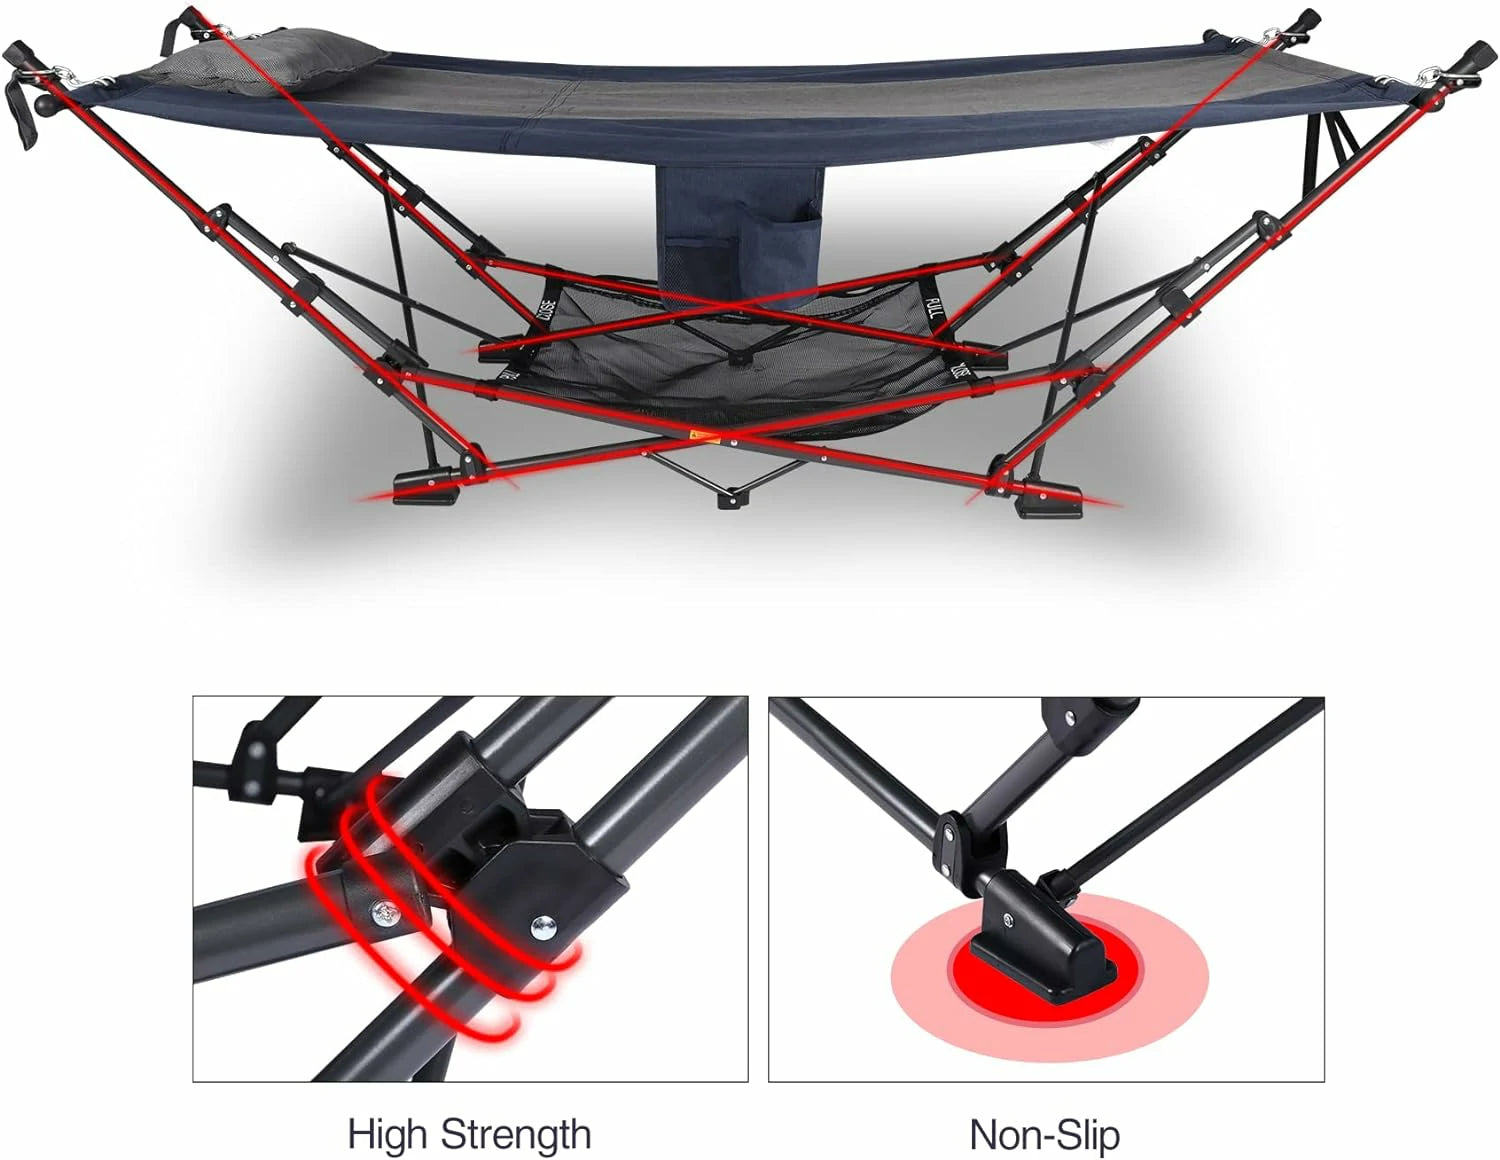 REDCAMP Portable Hammock with Stand